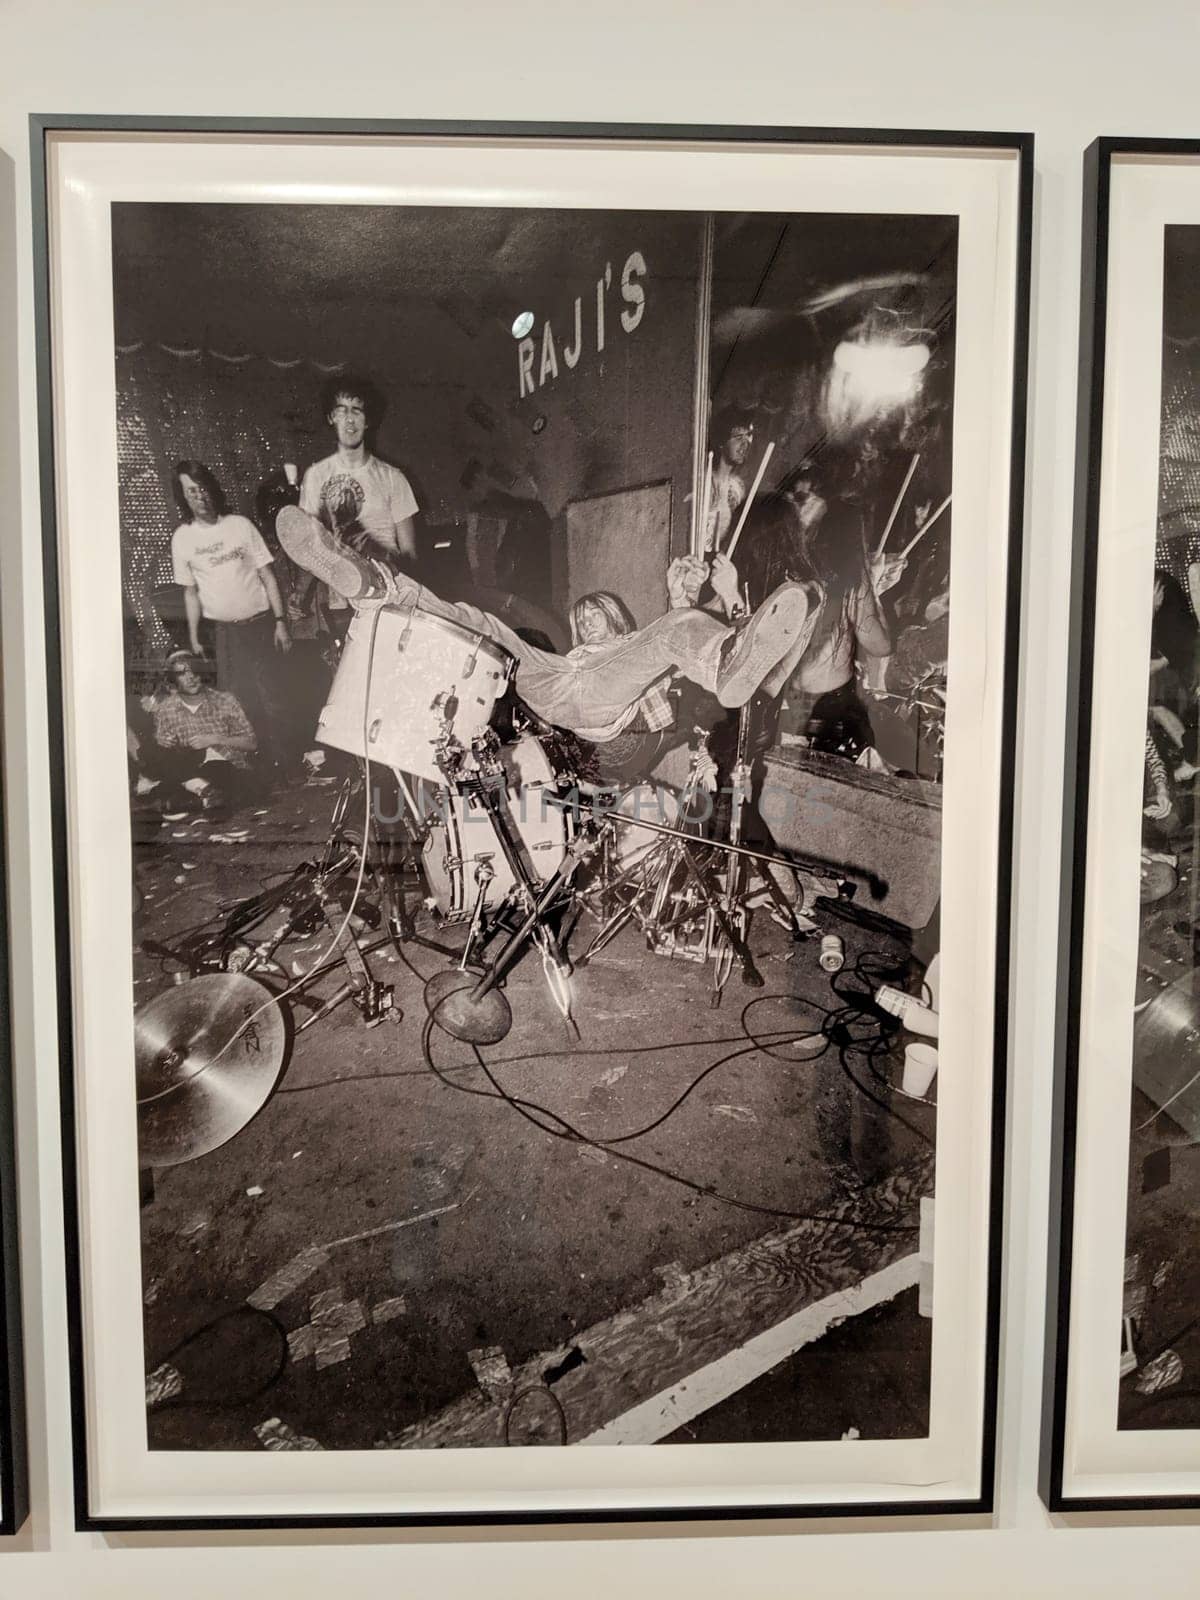 Nirvana Live Performance Photo at Seattle Art Museum by EricGBVD